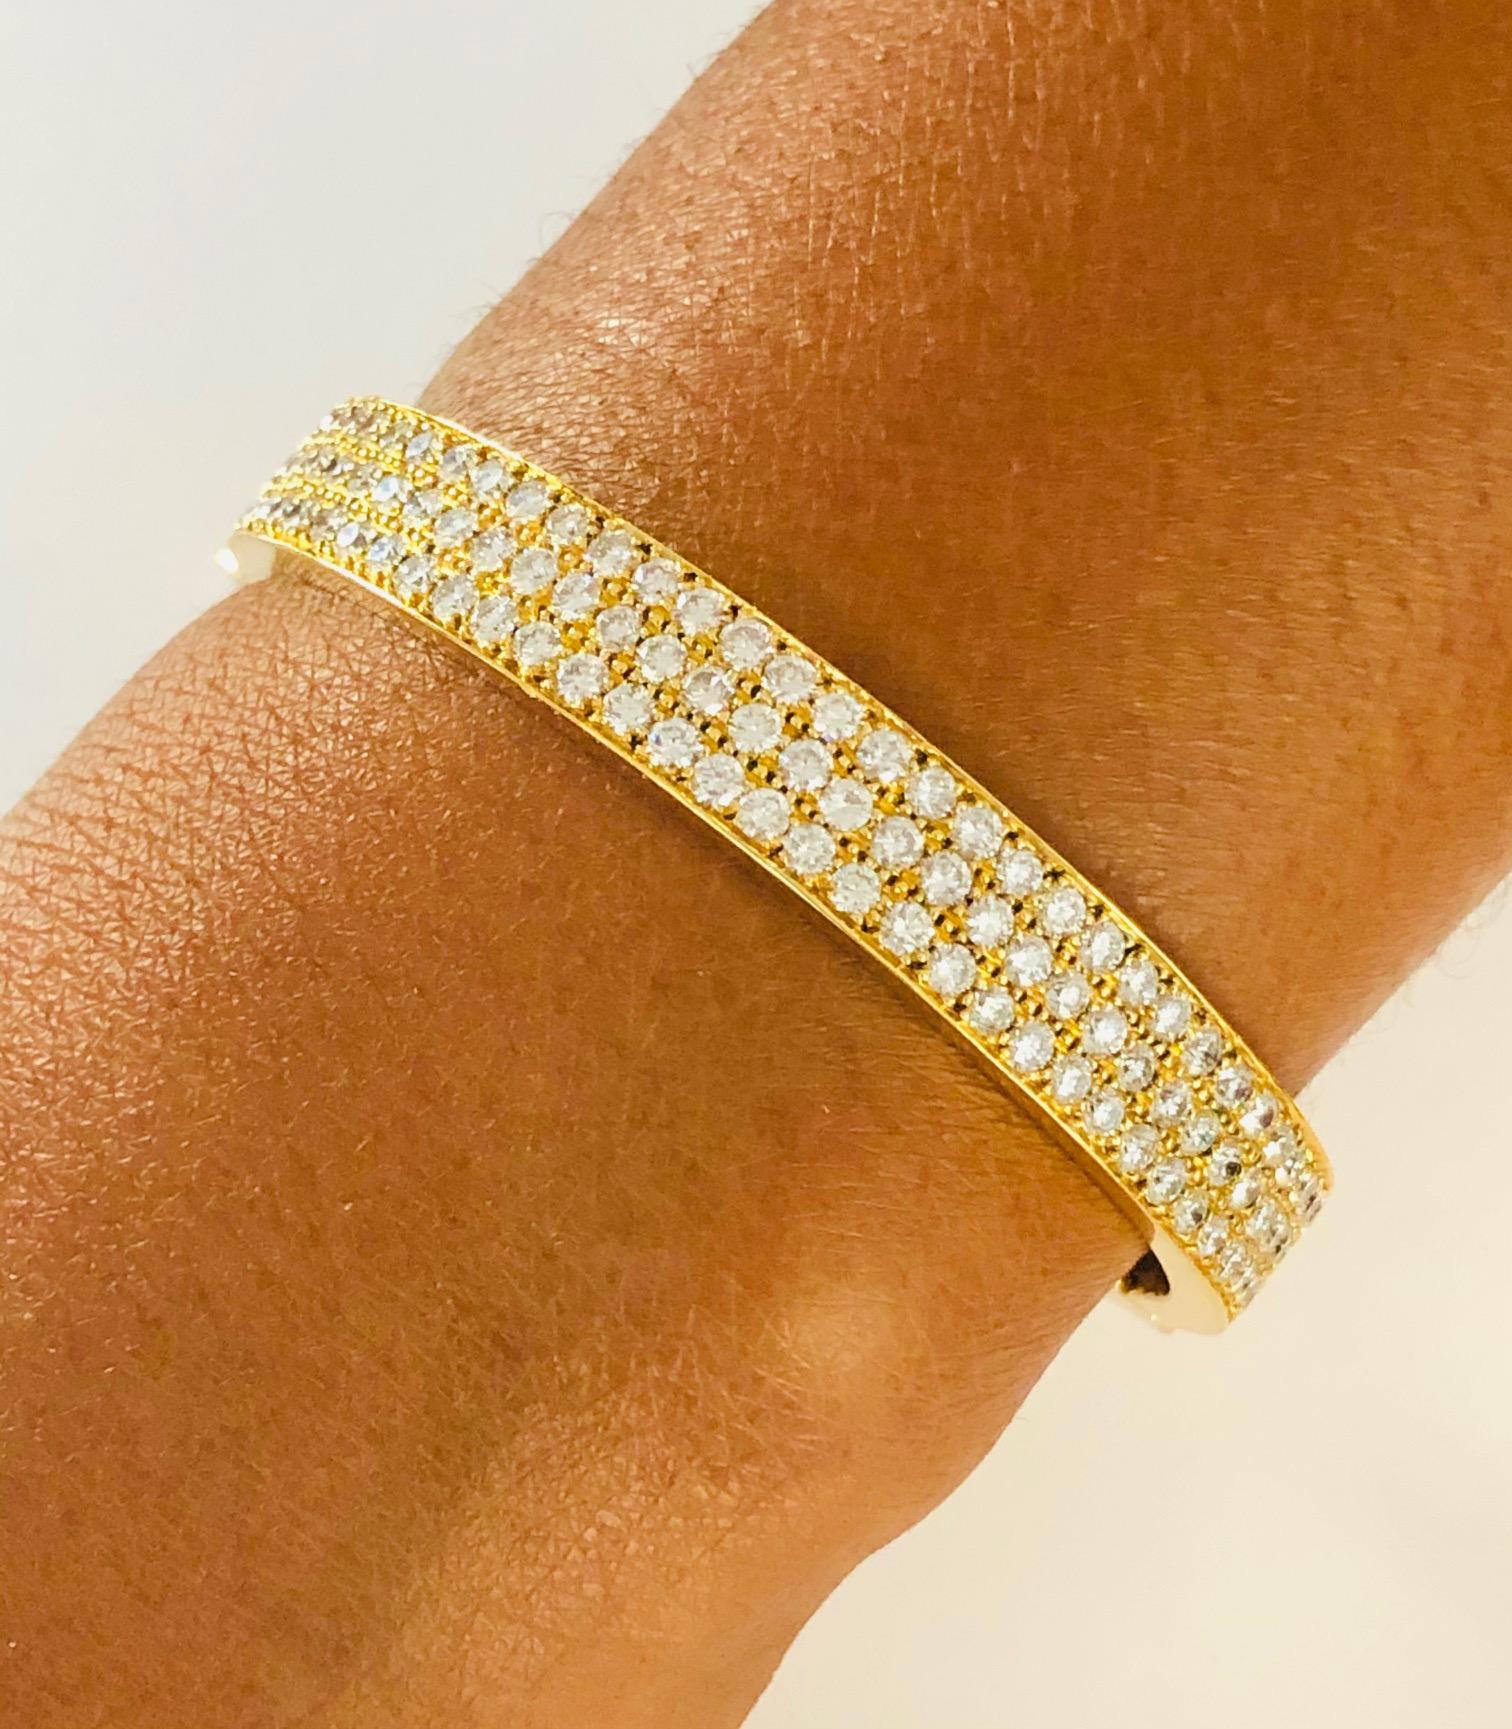 Beautiful 18K Yellow Gold Bangle Bracelet , set with 105 fine Diamonds 5.35 carats., 
Also available in 18K White Gold as shown in the photograph posted.
Bracelet Width 5/16 Inch ( 0.9 CM )

We deign and manufacture our jewelry in our workshop,